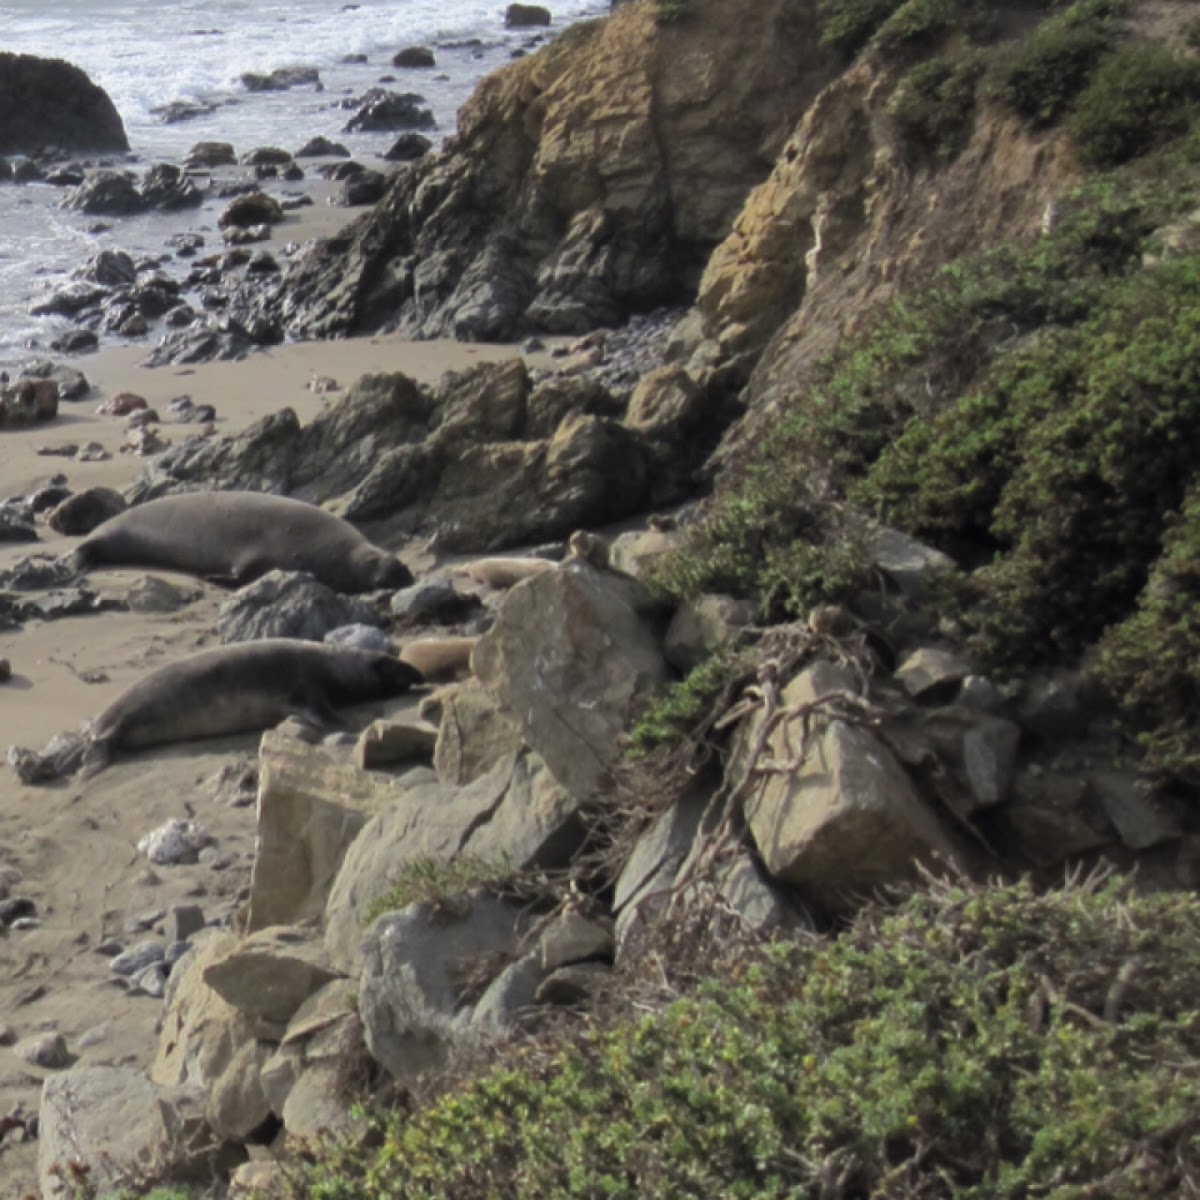 California ground squirrel (with northern elephant seal)